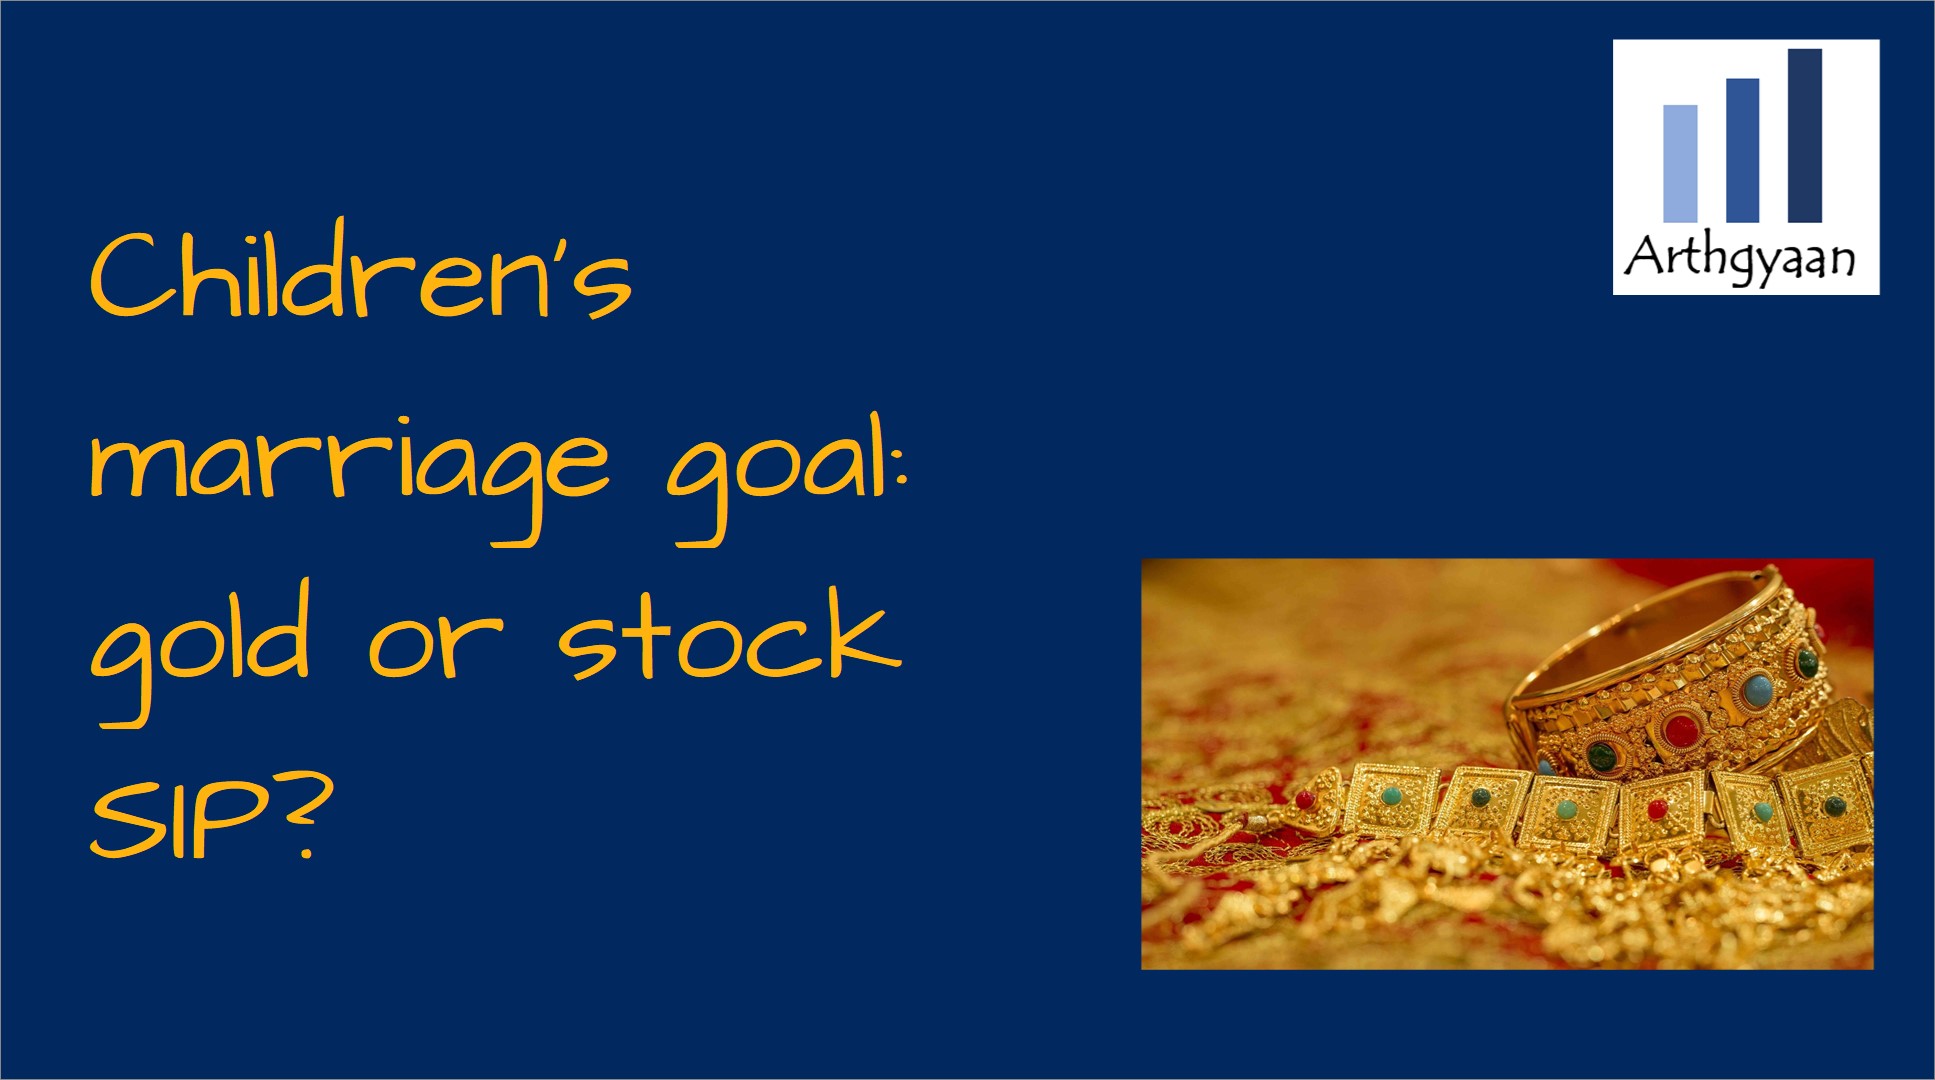 What will create a higher corpus for children's marriage: buying physical gold vs SIP in stocks